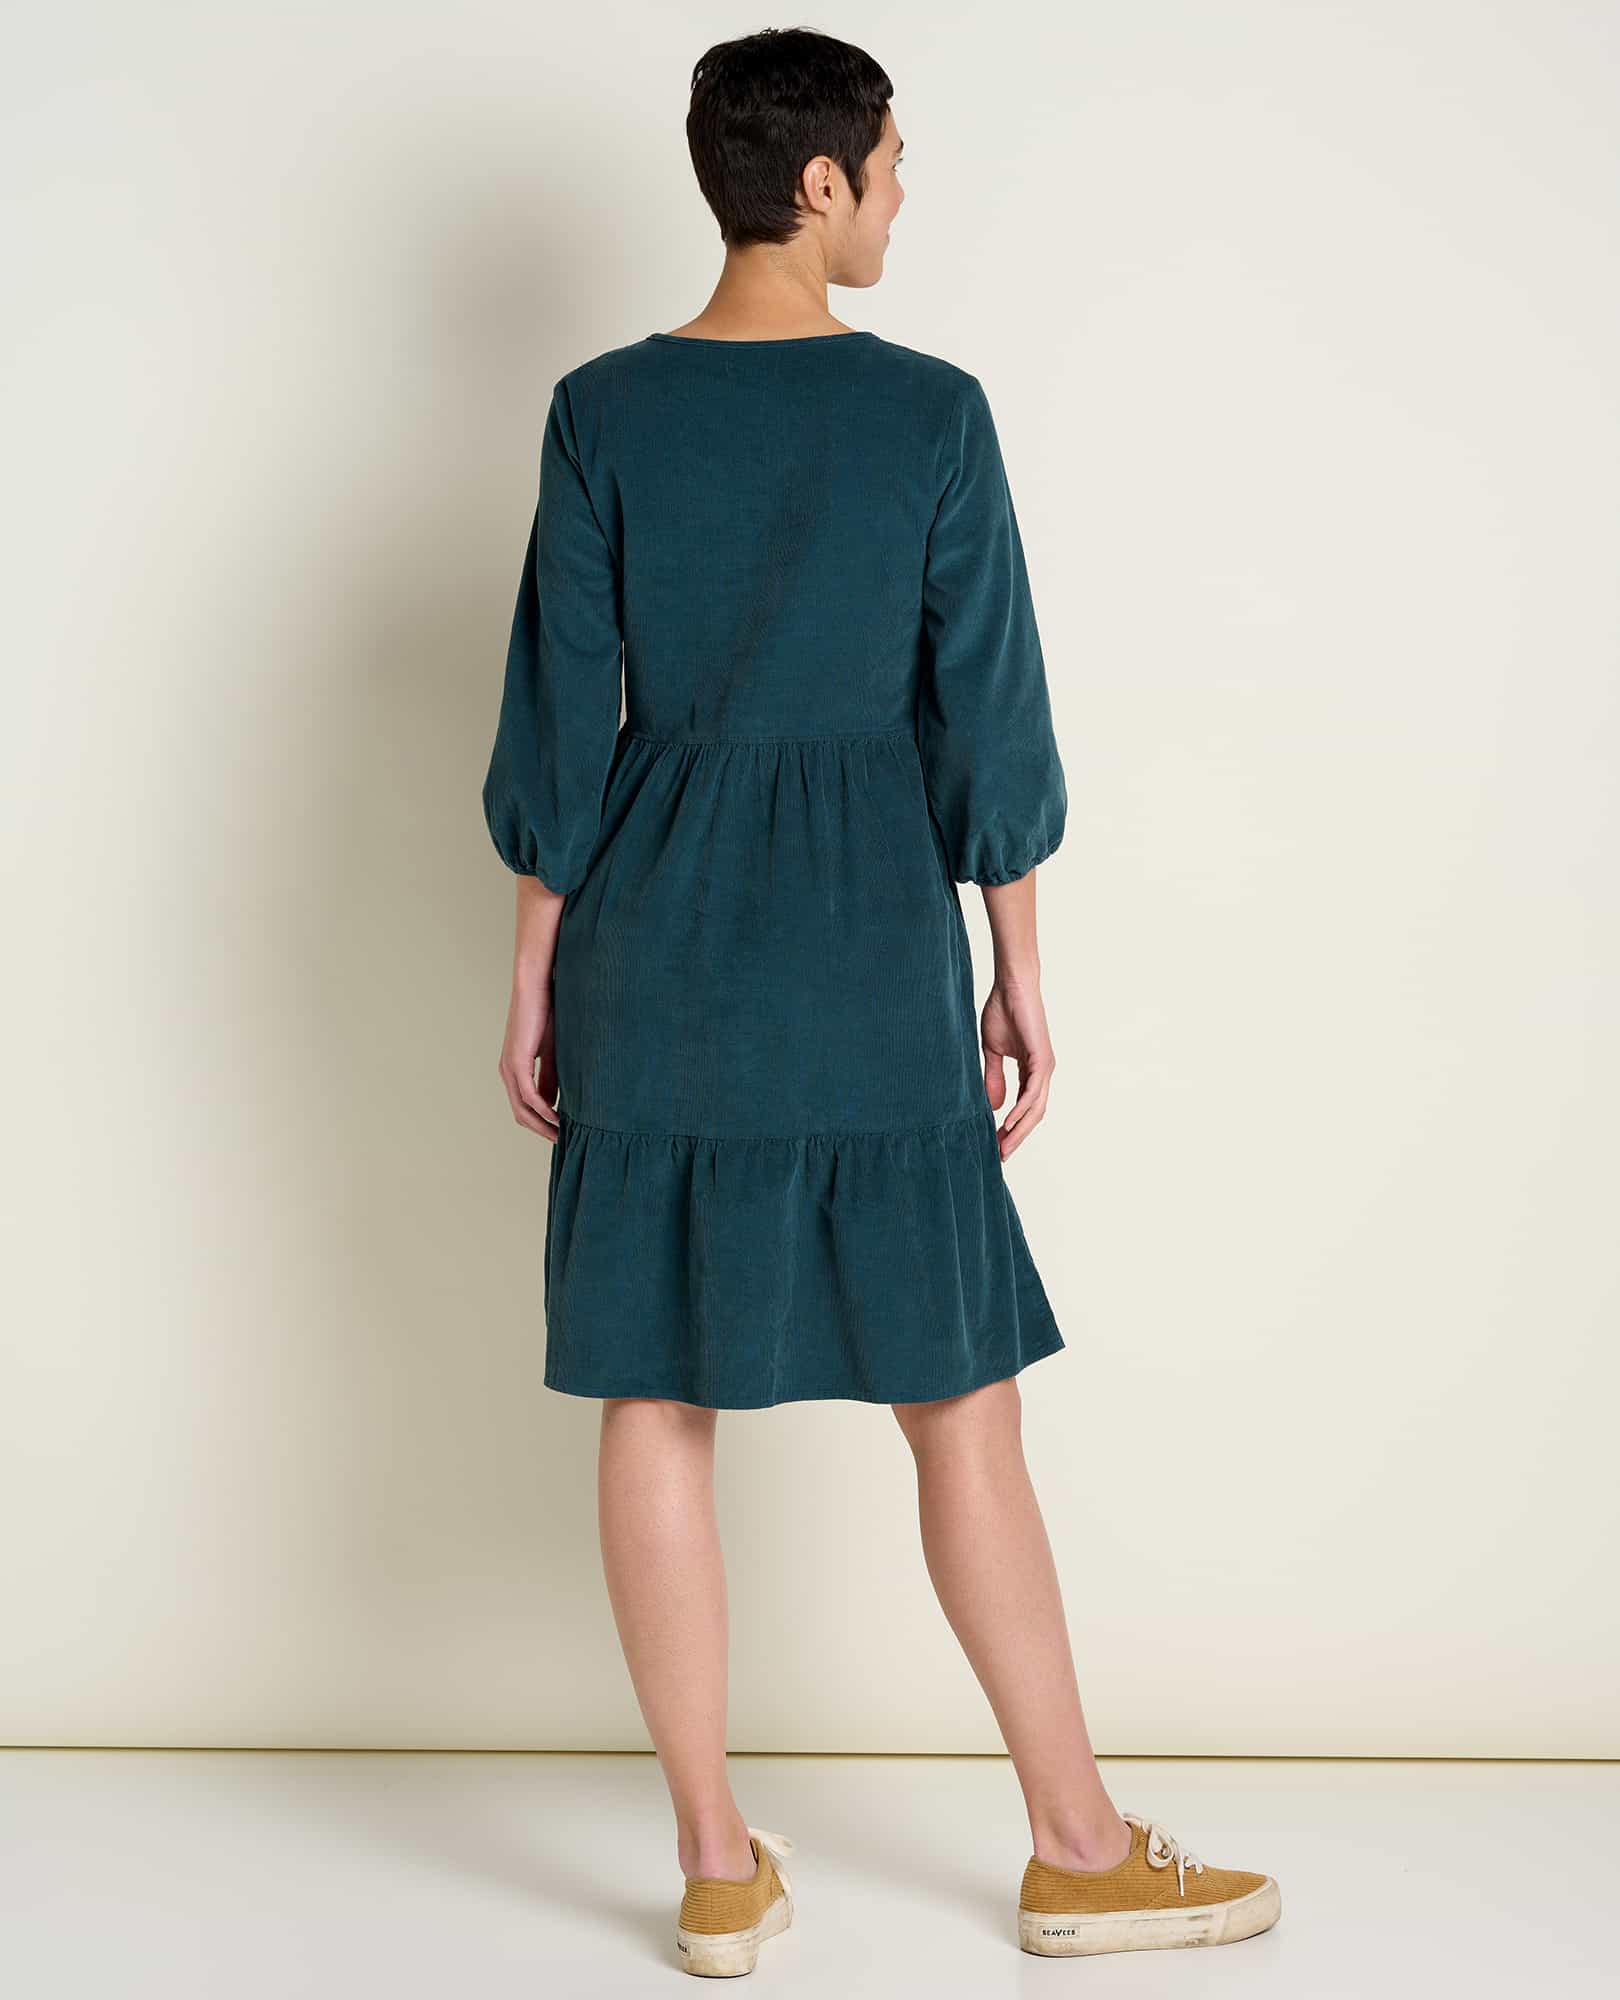 Scouter Cord Tiered Dress